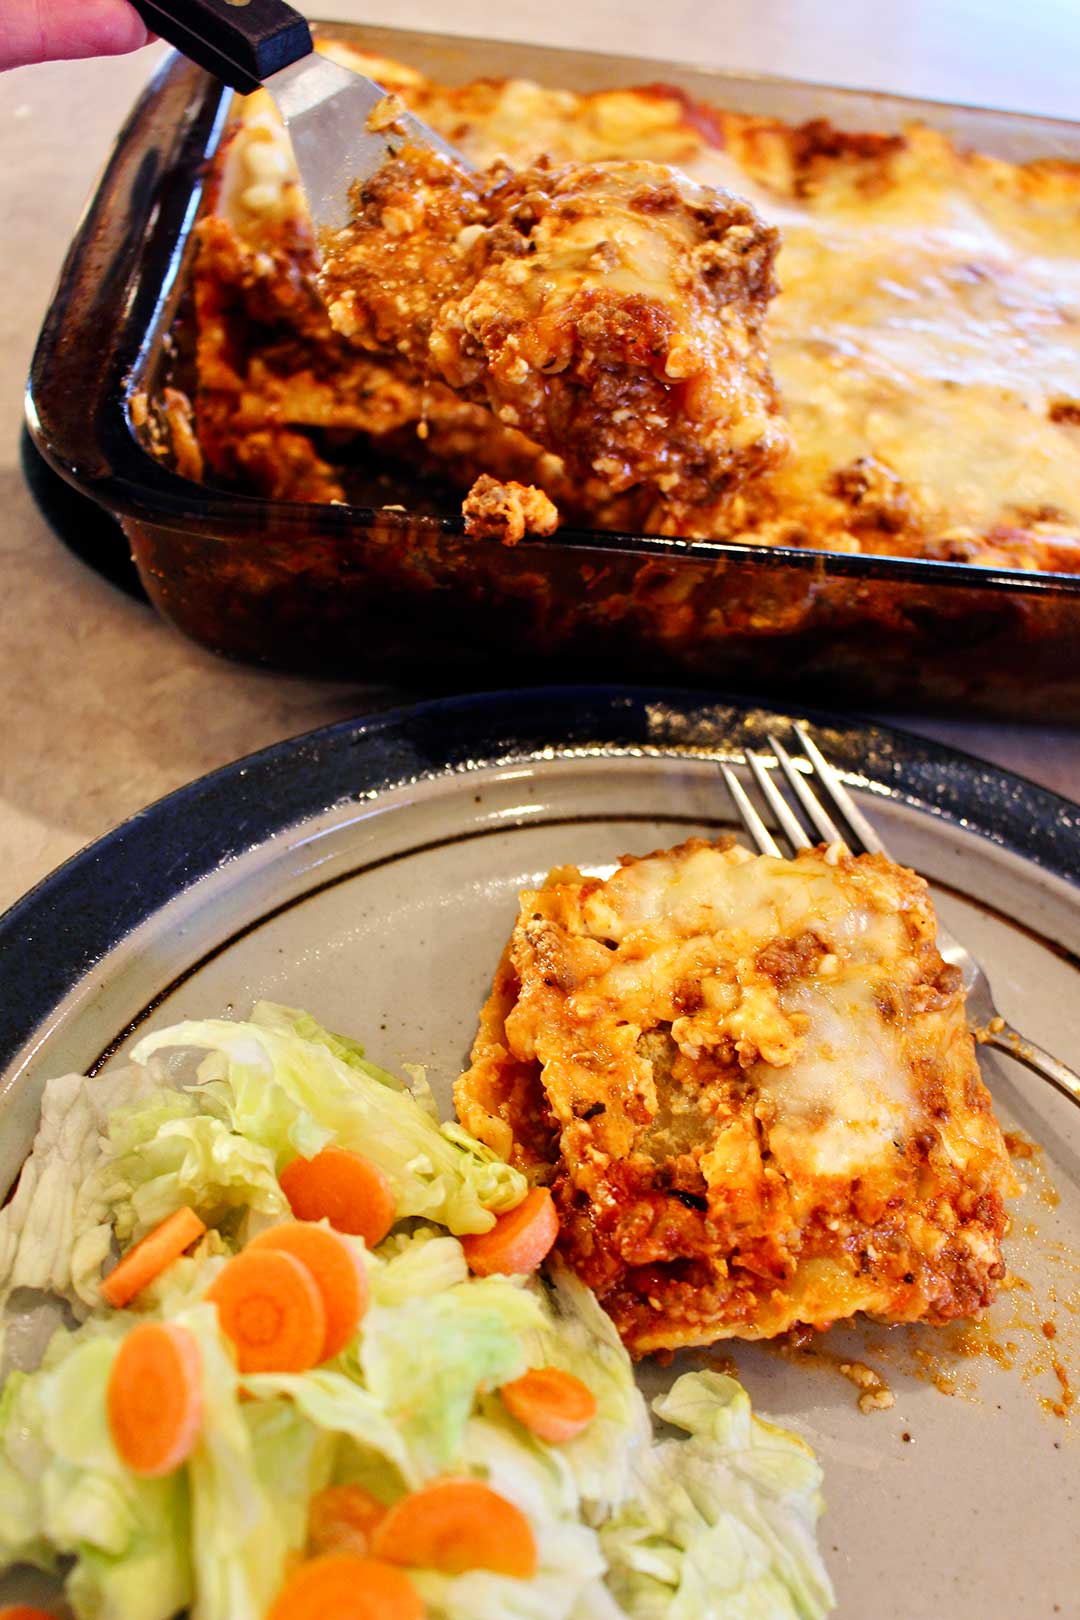 Plate with slice of an easy lasagna recipe and lettuce and carrot salad with pan of lasagna nearby.